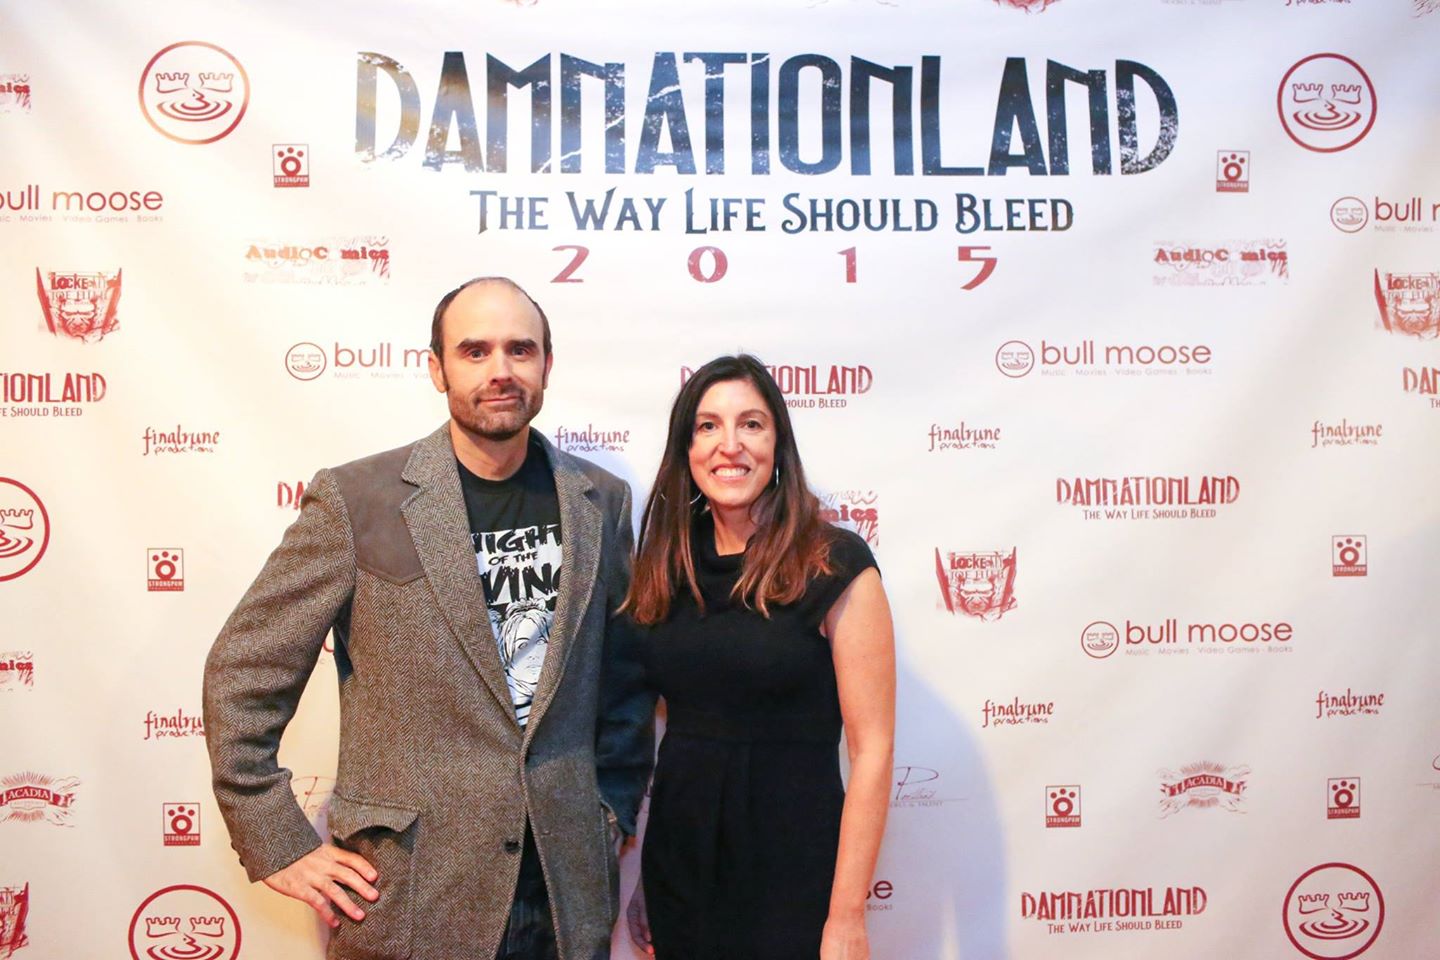 Red carpet at Damnationland 2015 premiere, Portland, Maine, with actress/playwright, Kat Loef. Neurophreak, The Poet, and 8 other short films are part of Damnationland '15.